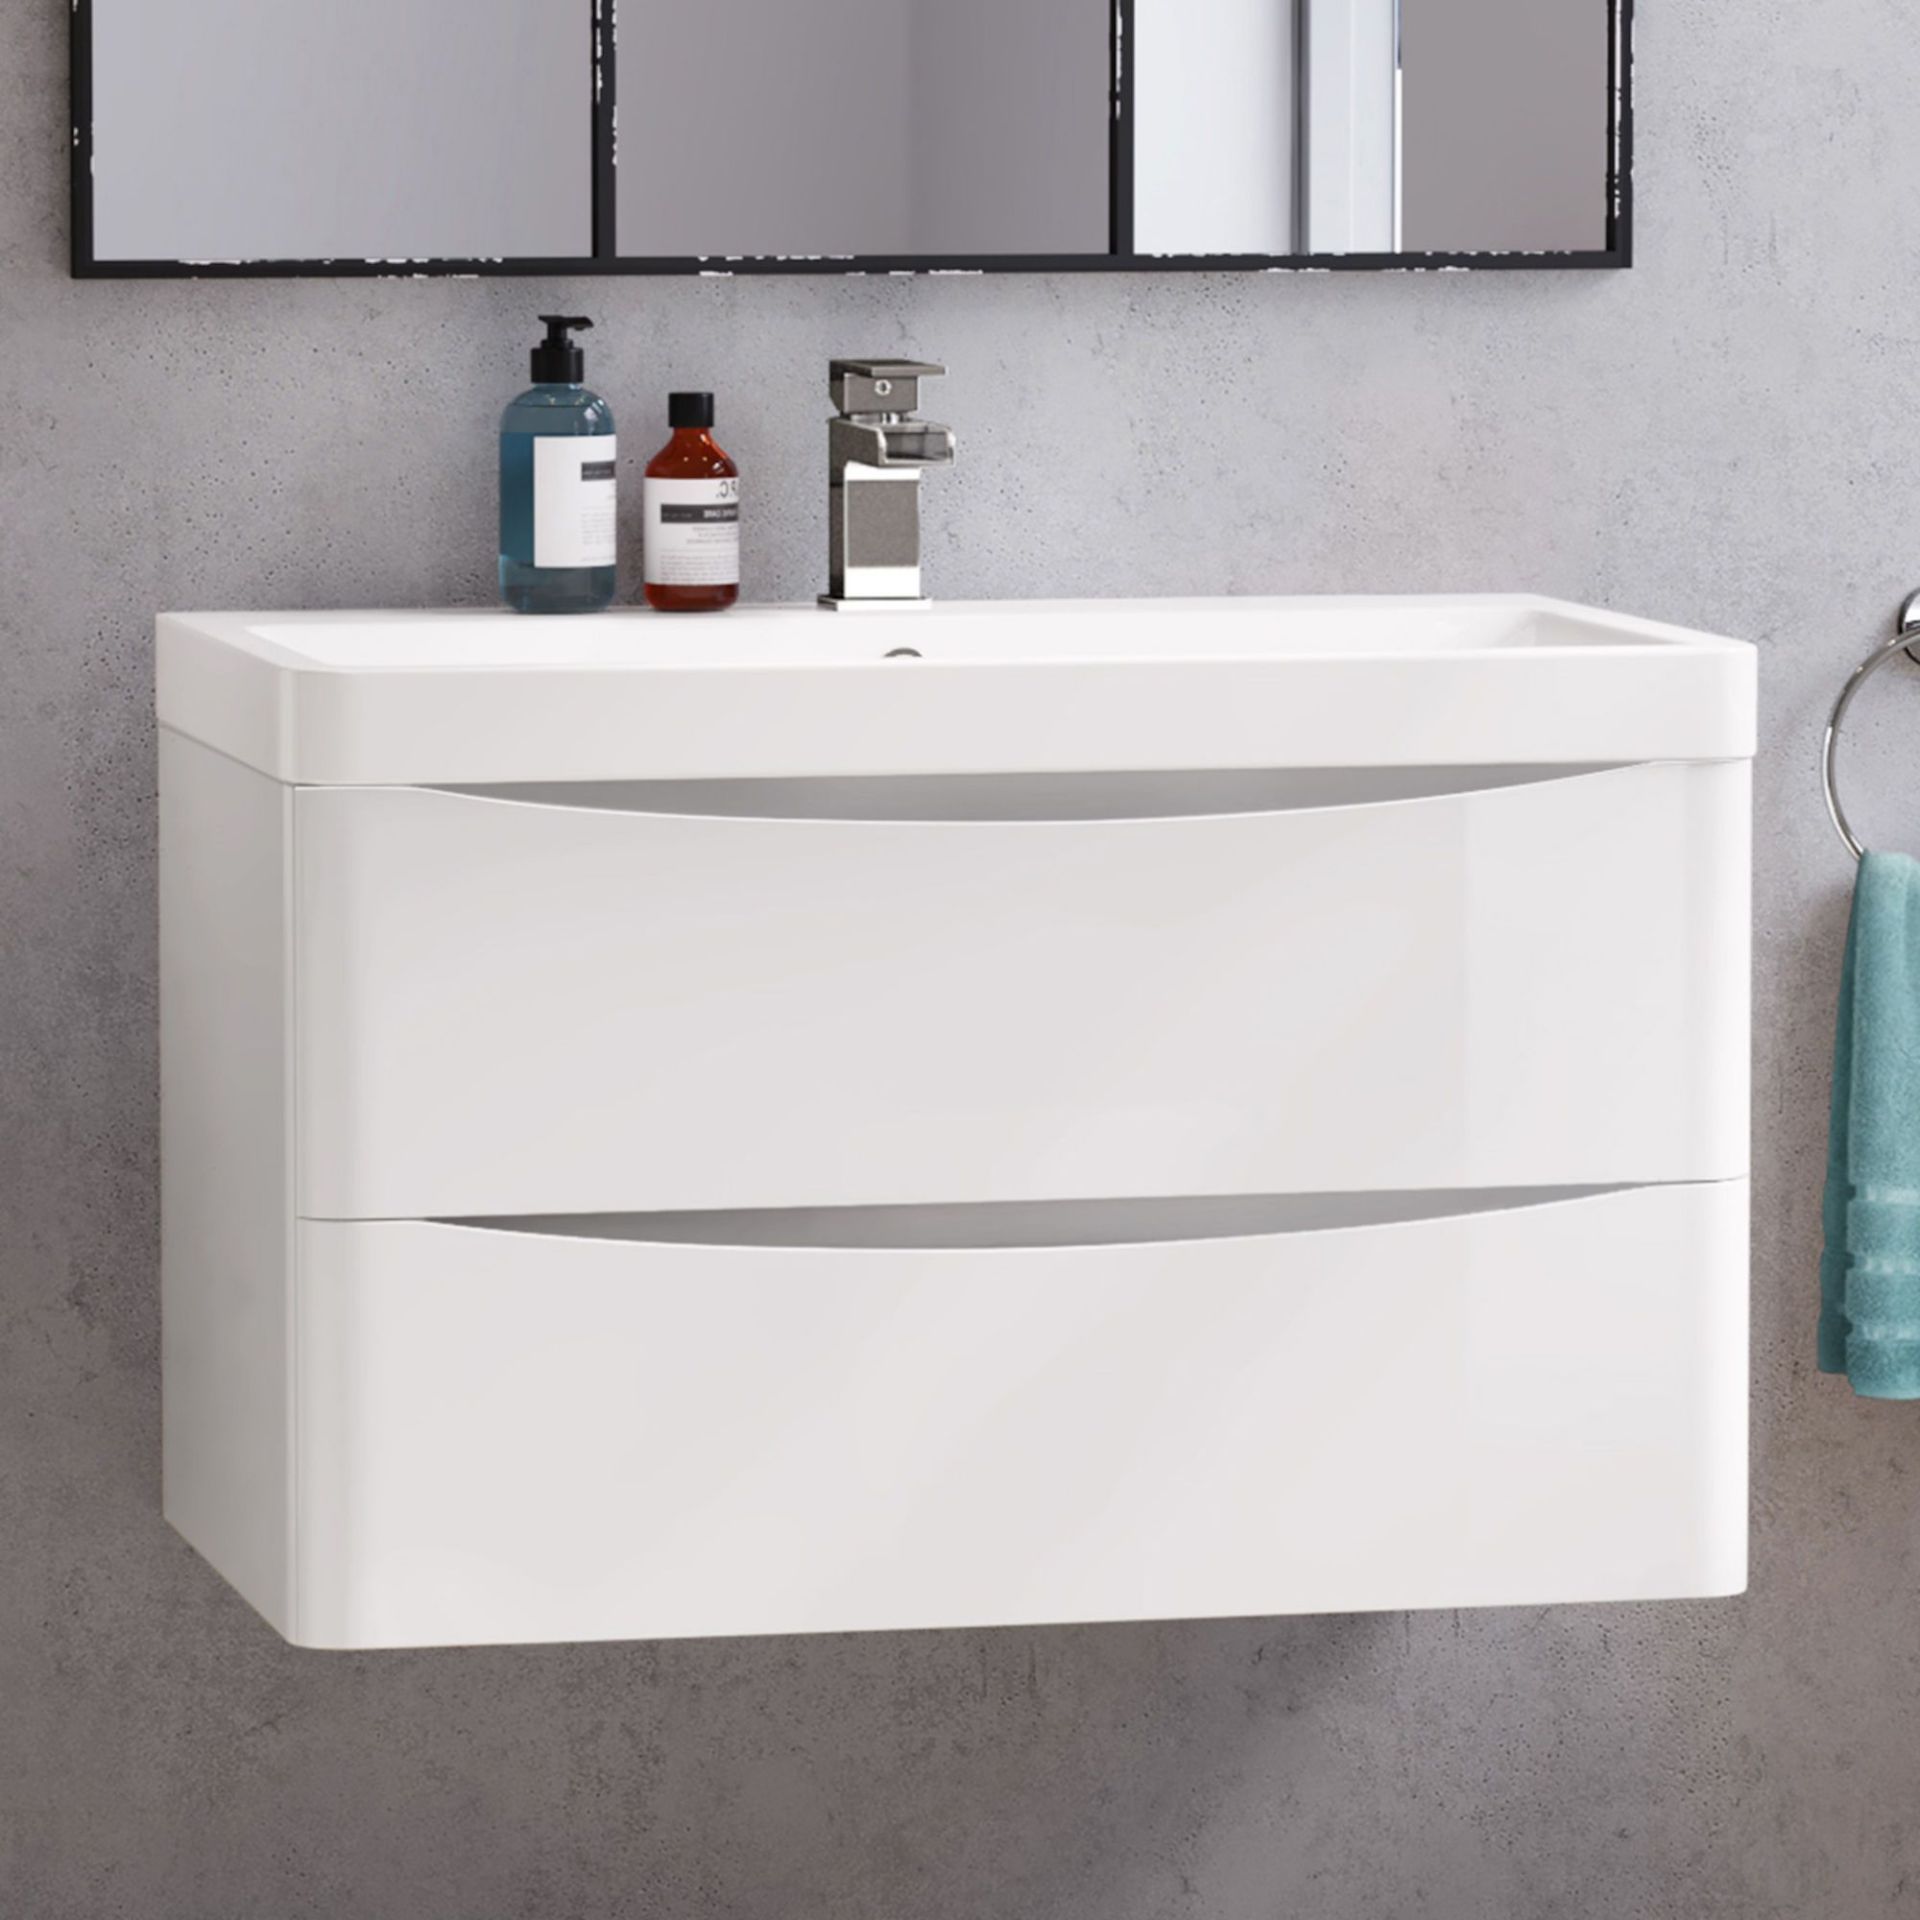 New 1000mm Austin Ii Gloss White Built In Basin Drawer Unit - Wall Hung. RRP £999.99.Comes ...   New